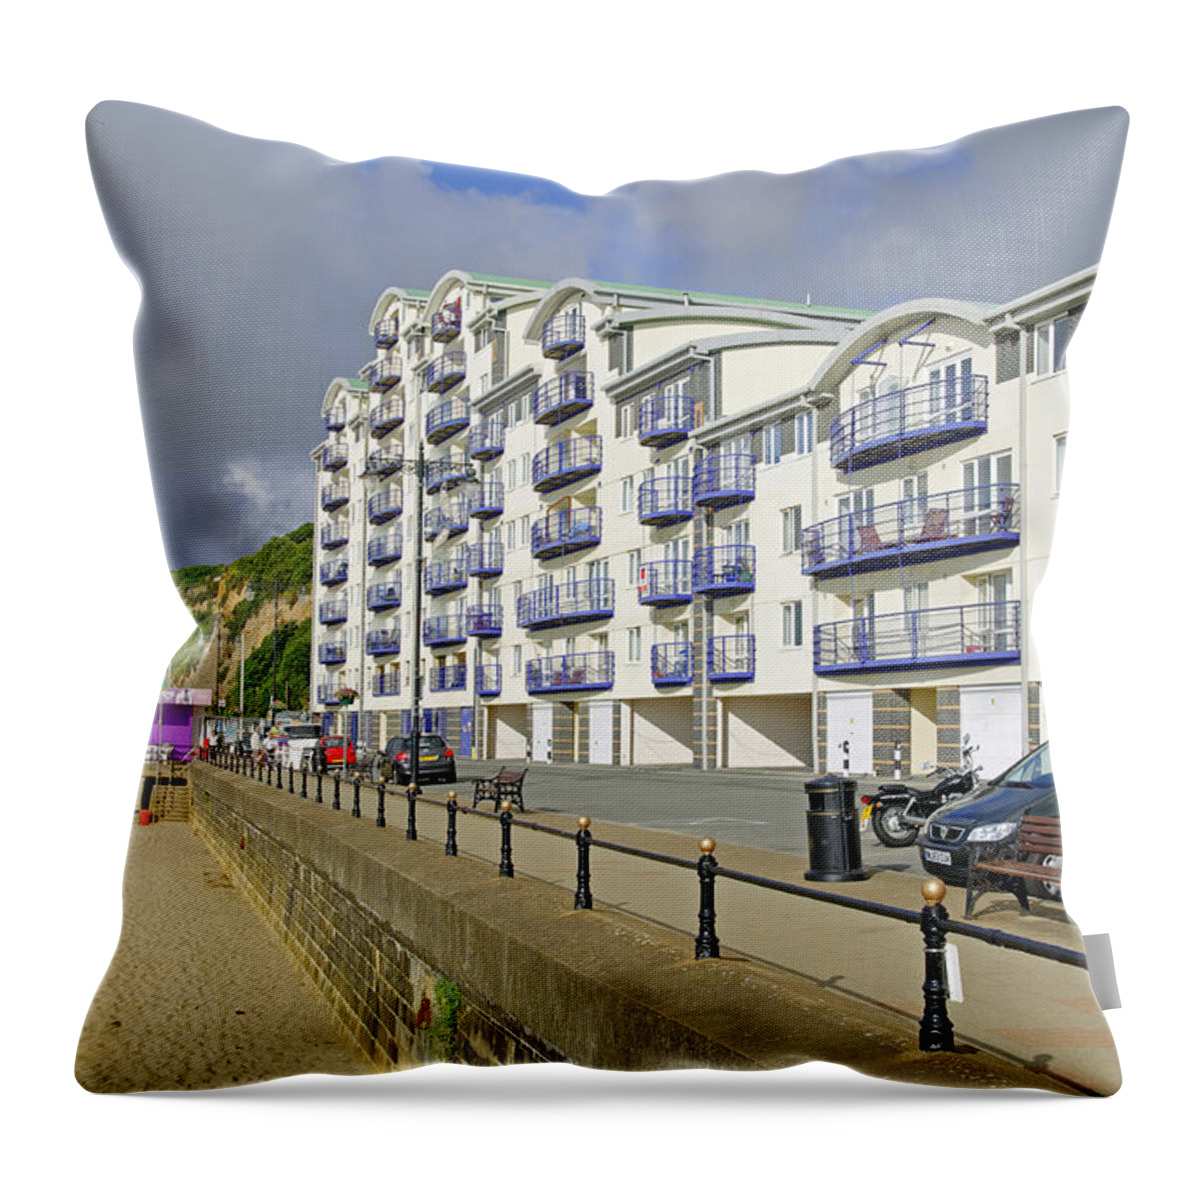 Europe Throw Pillow featuring the photograph New Flats Overlooking Sandown Esplanade by Rod Johnson